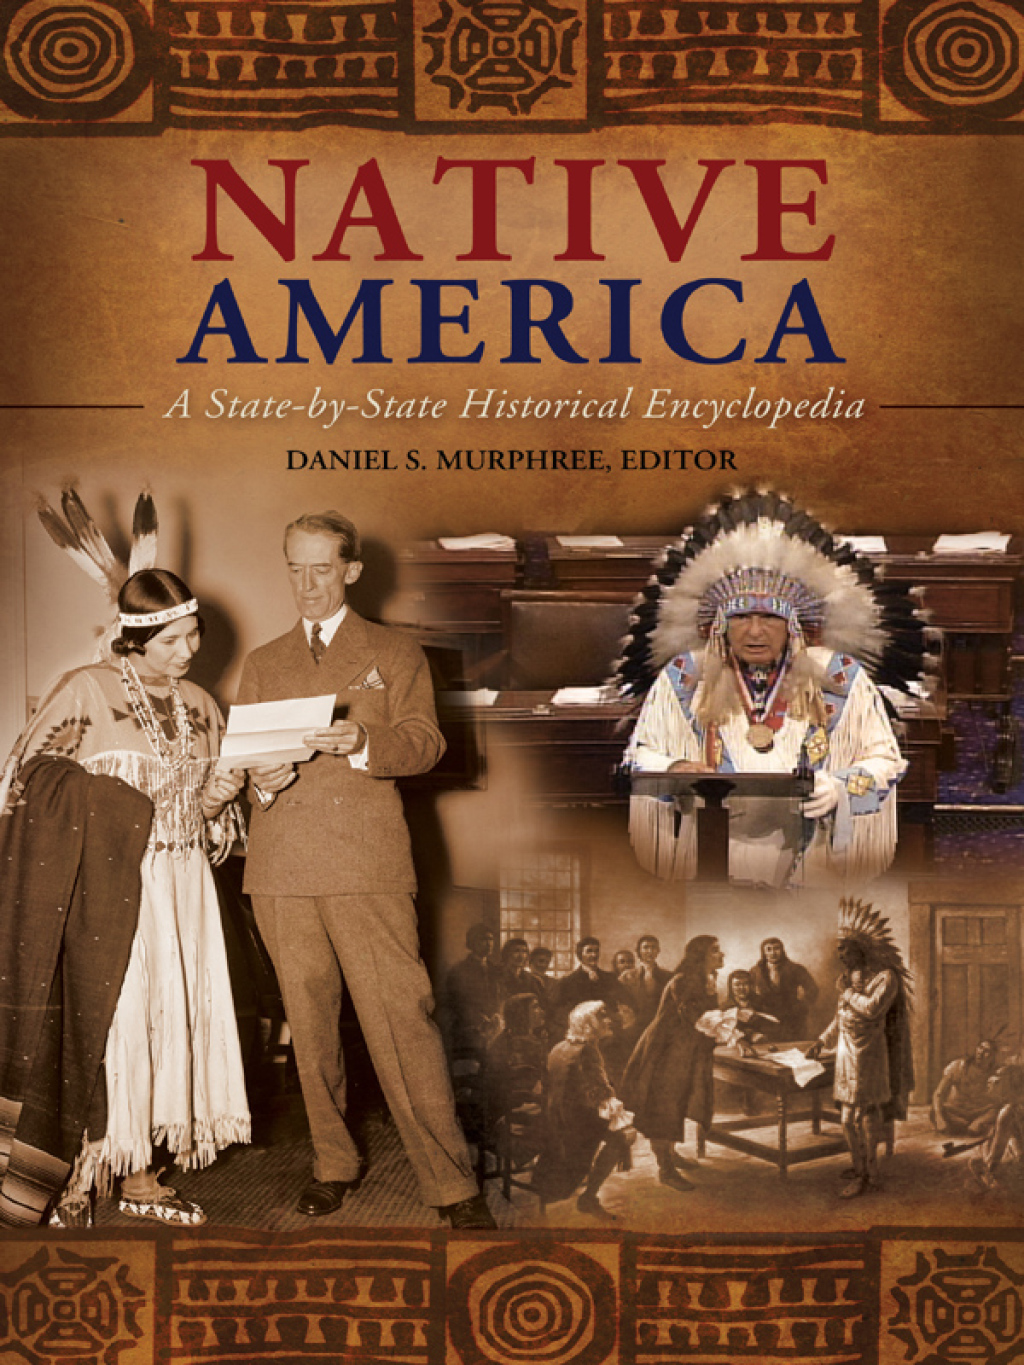 Native America: A State-by-State Historical Encyclopedia [3 volumes] (eBook Rental)